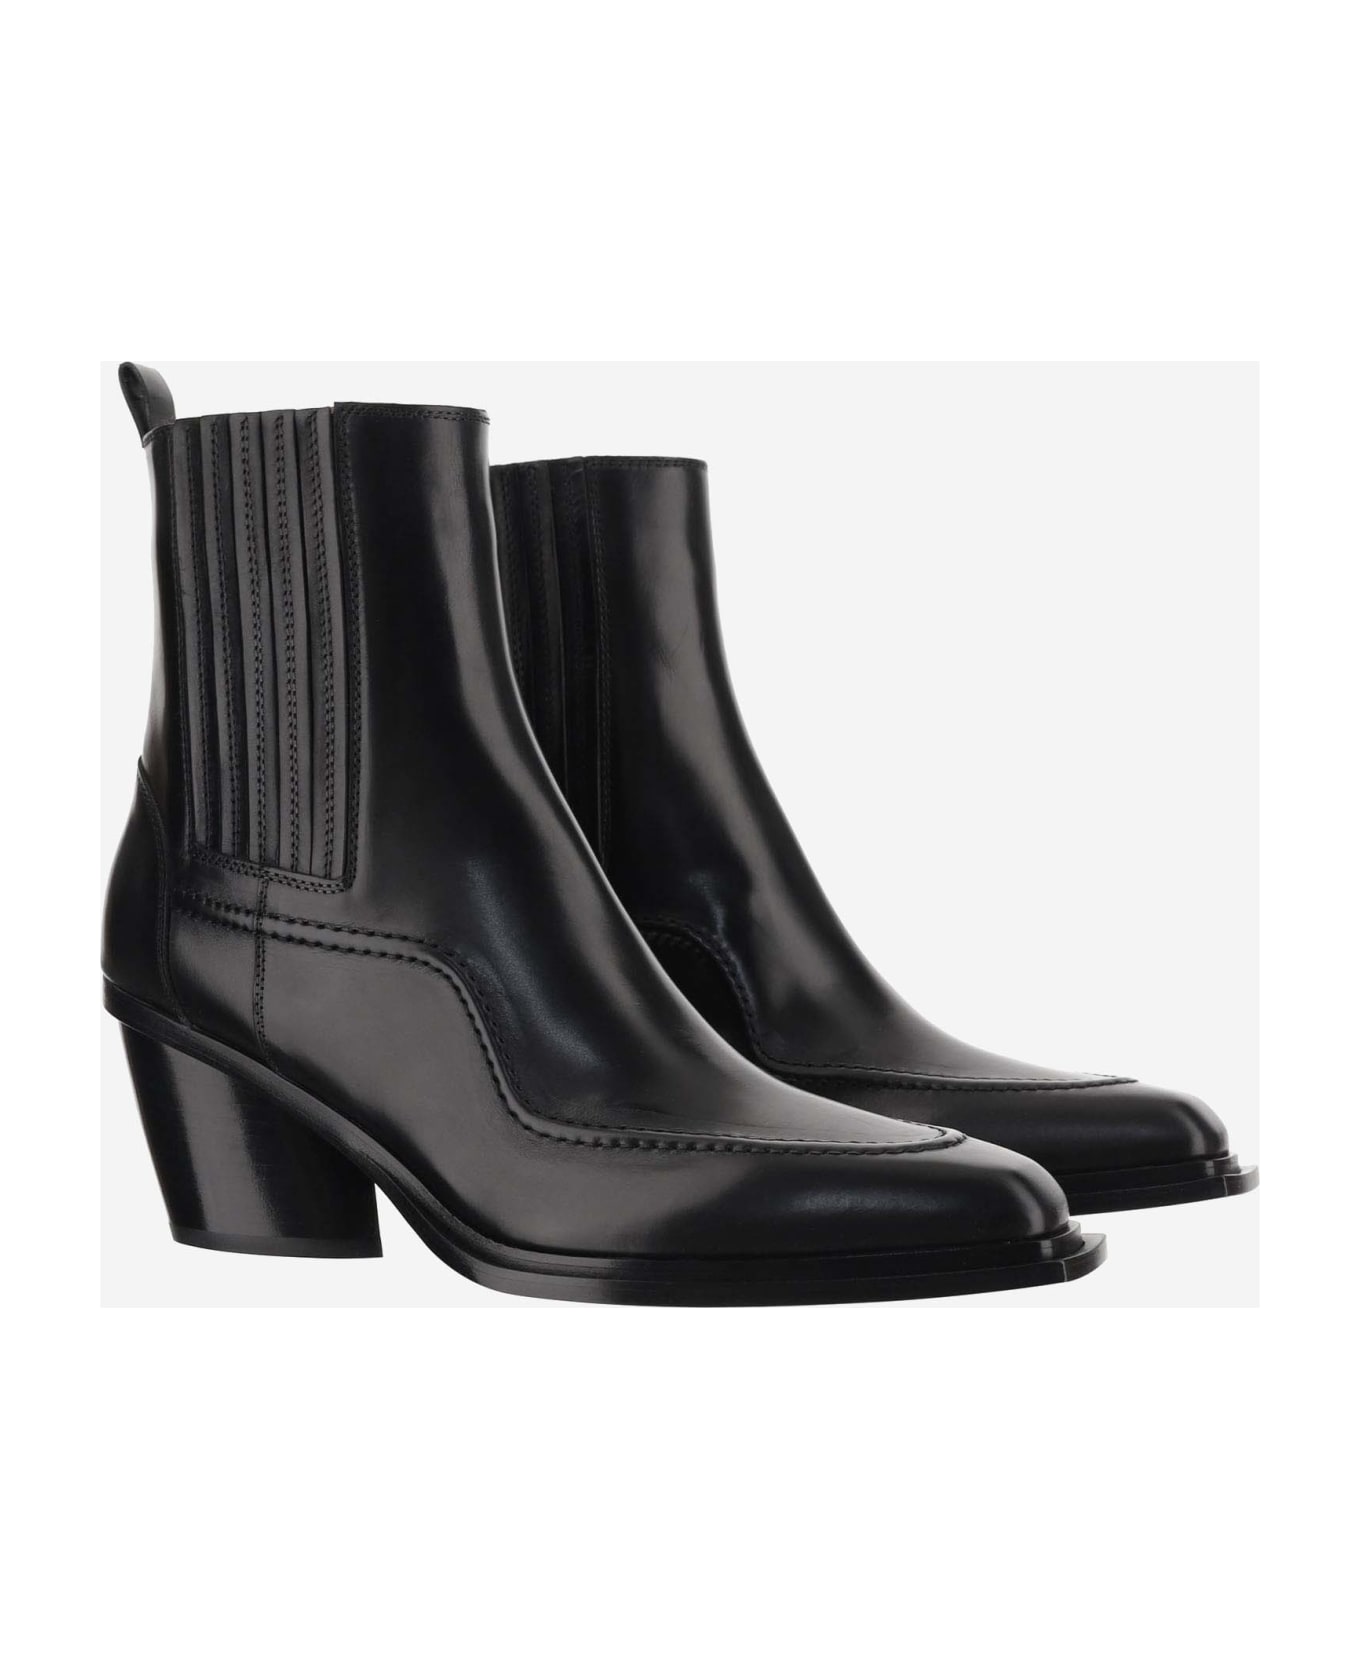 Sartore Leather Boots - Black